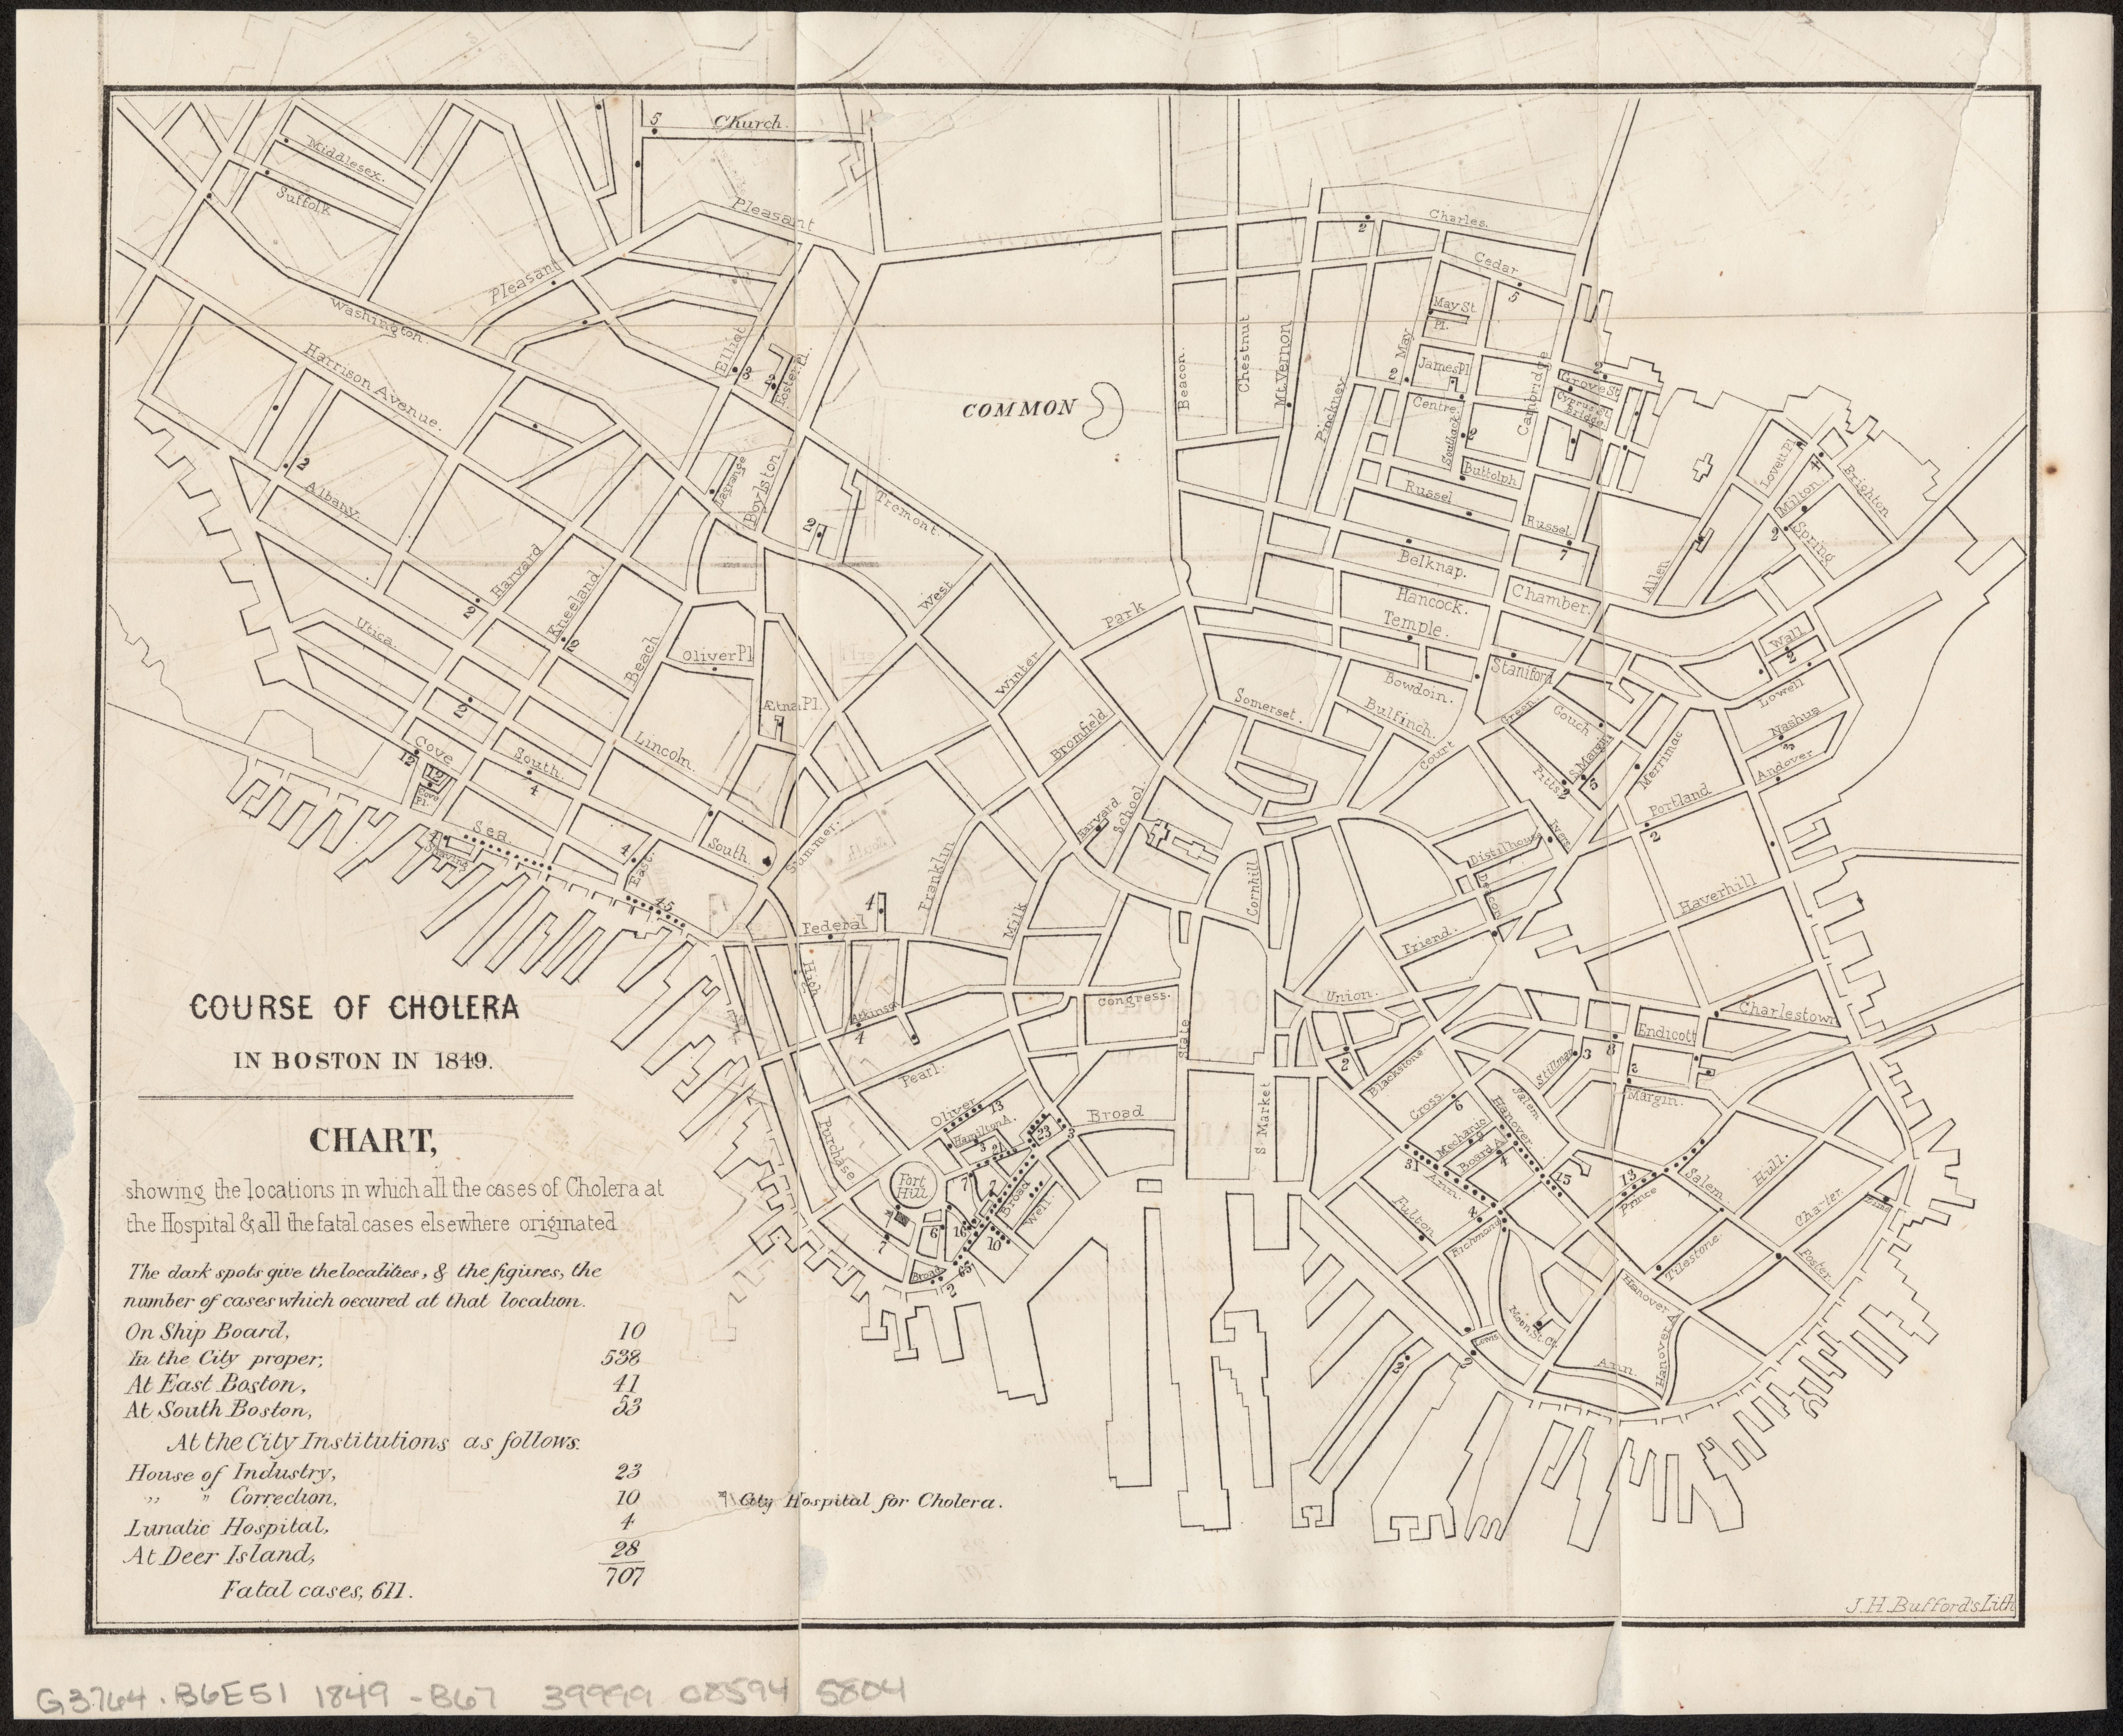 The Committee on Internal Health published this map to track the origins of cholera cases treated at the Cholera Hospital in Boston’s Fort Hill neighborhood in 1849. Notice the difference in aesthetic styles.